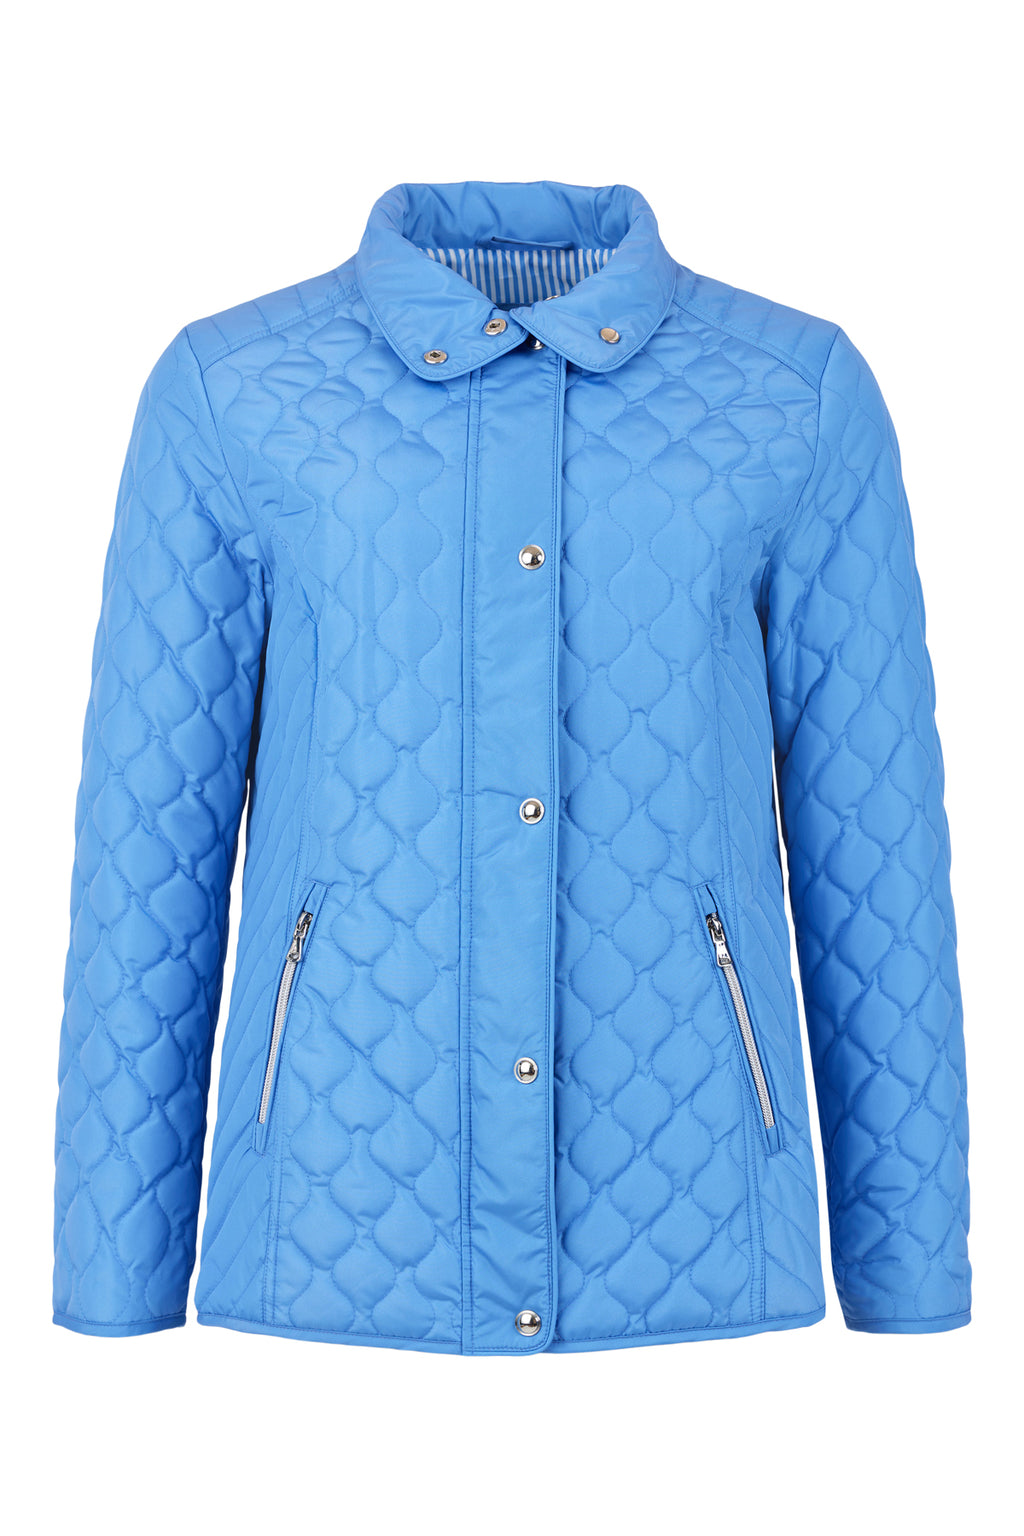 <p>Frandsen quilted jacket in blue</p>
<p>Product code 843-371</p>